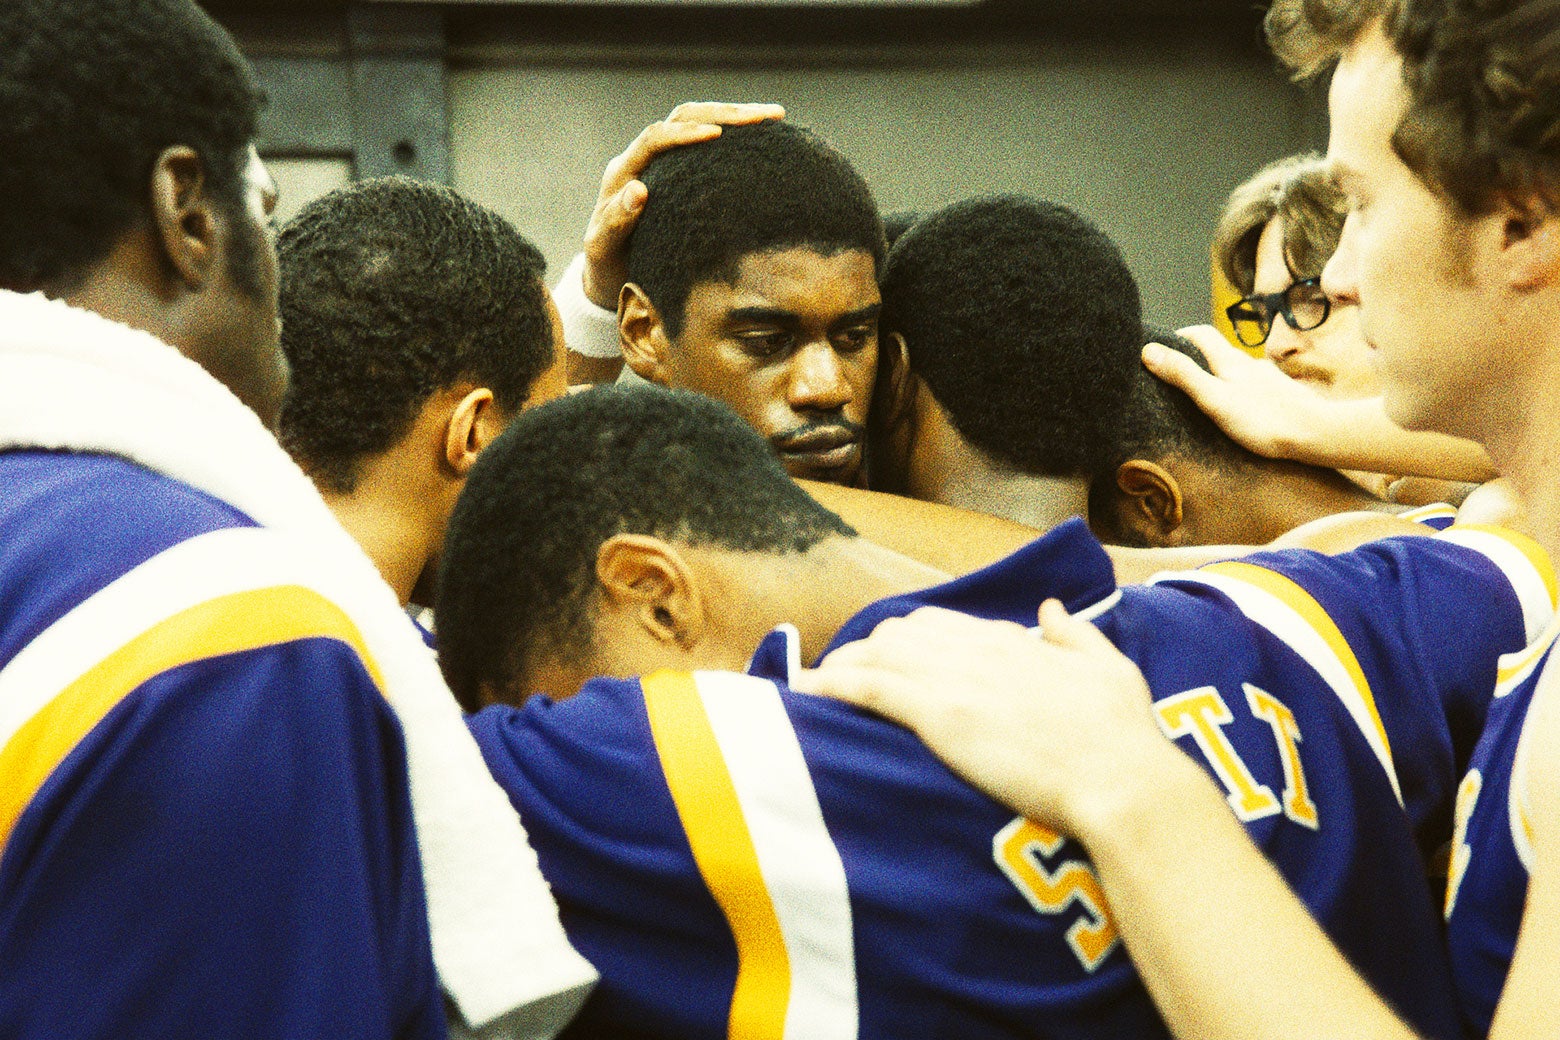 L.A. Lakers in a group hug, with a tearful Magic Johnson in the center.